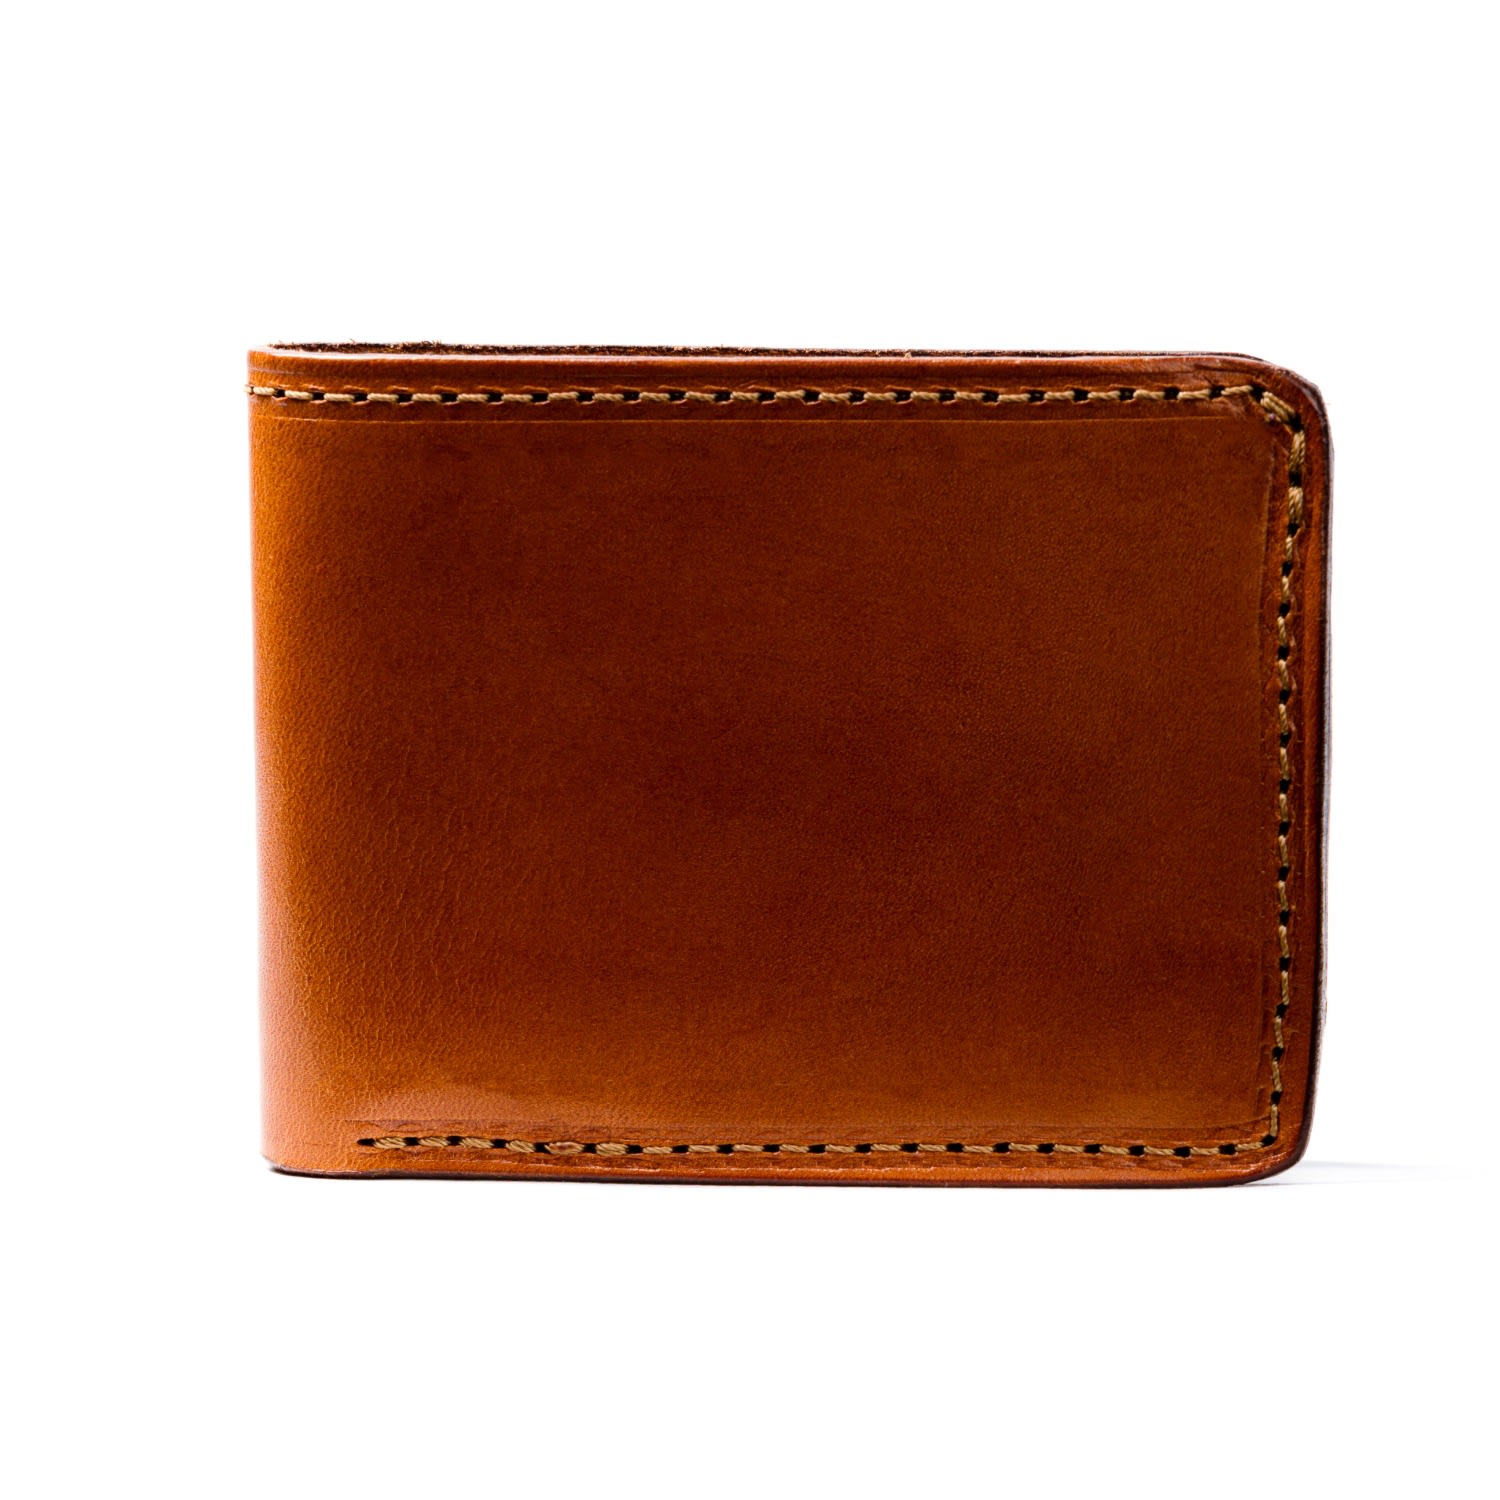 The Dust Company Men's Leather Wallet In Cuoio Brown